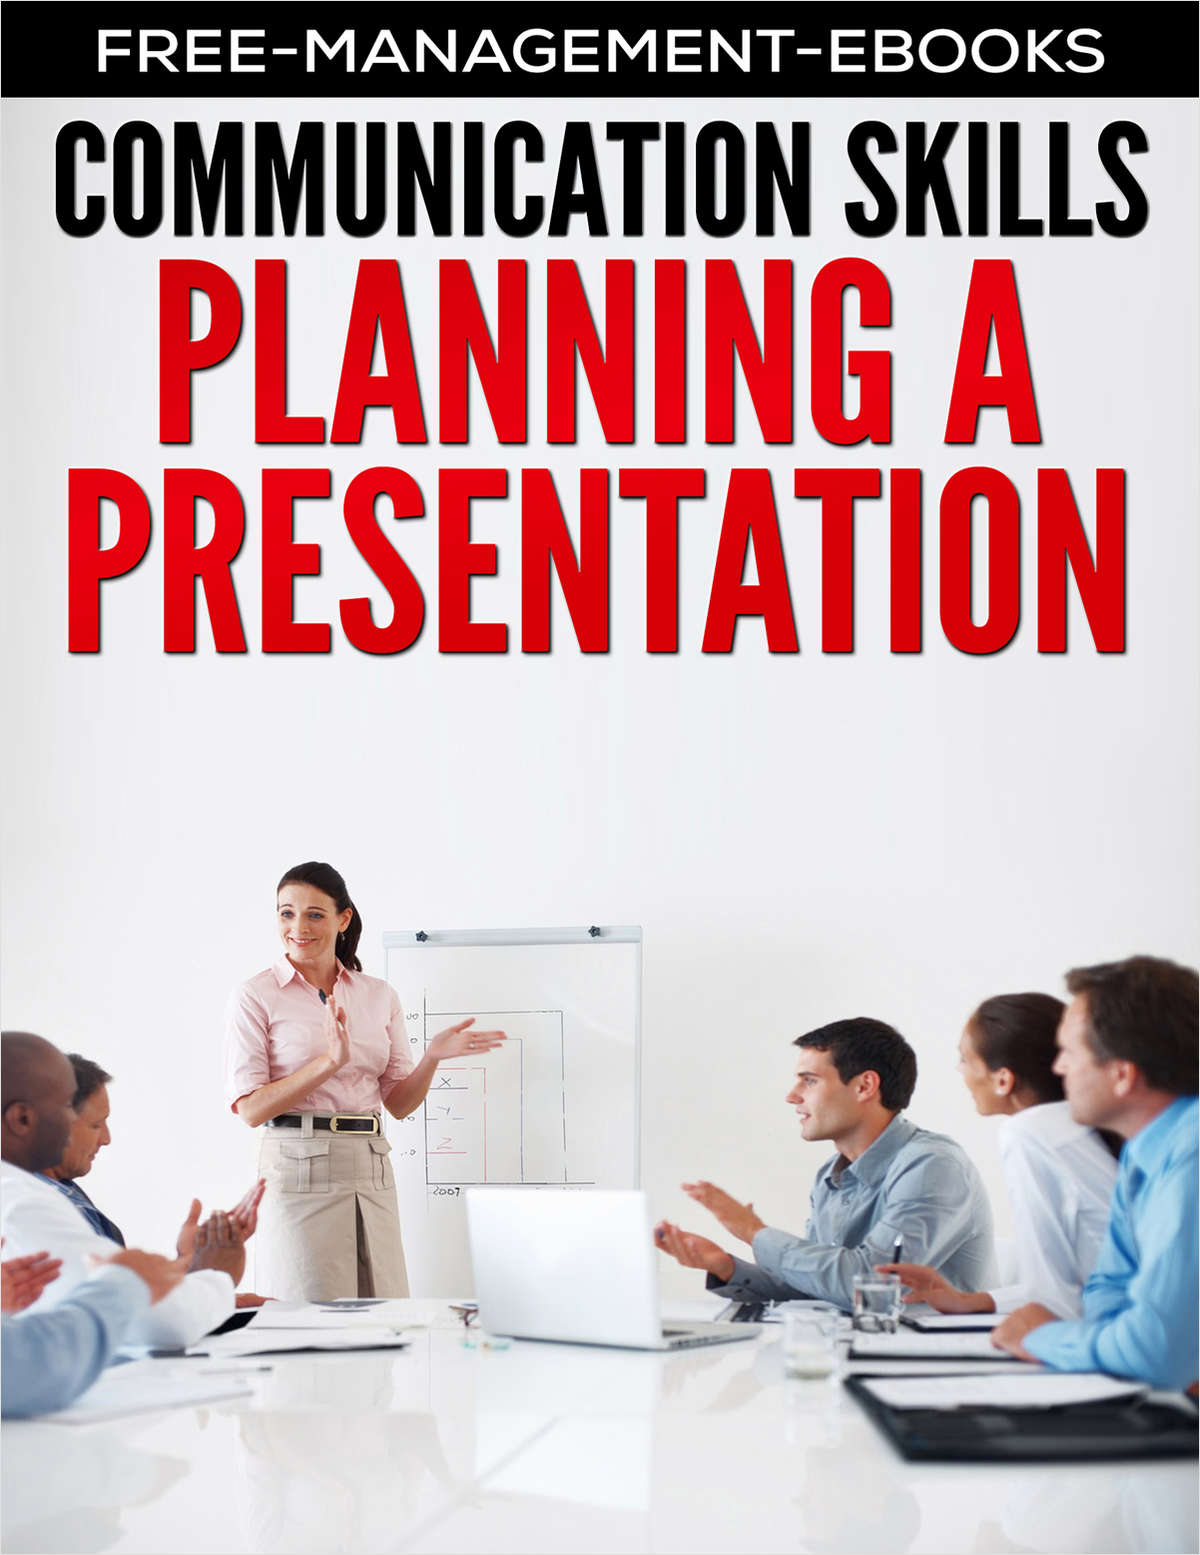 Planning a Presentation -- Developing Your Communication Skills